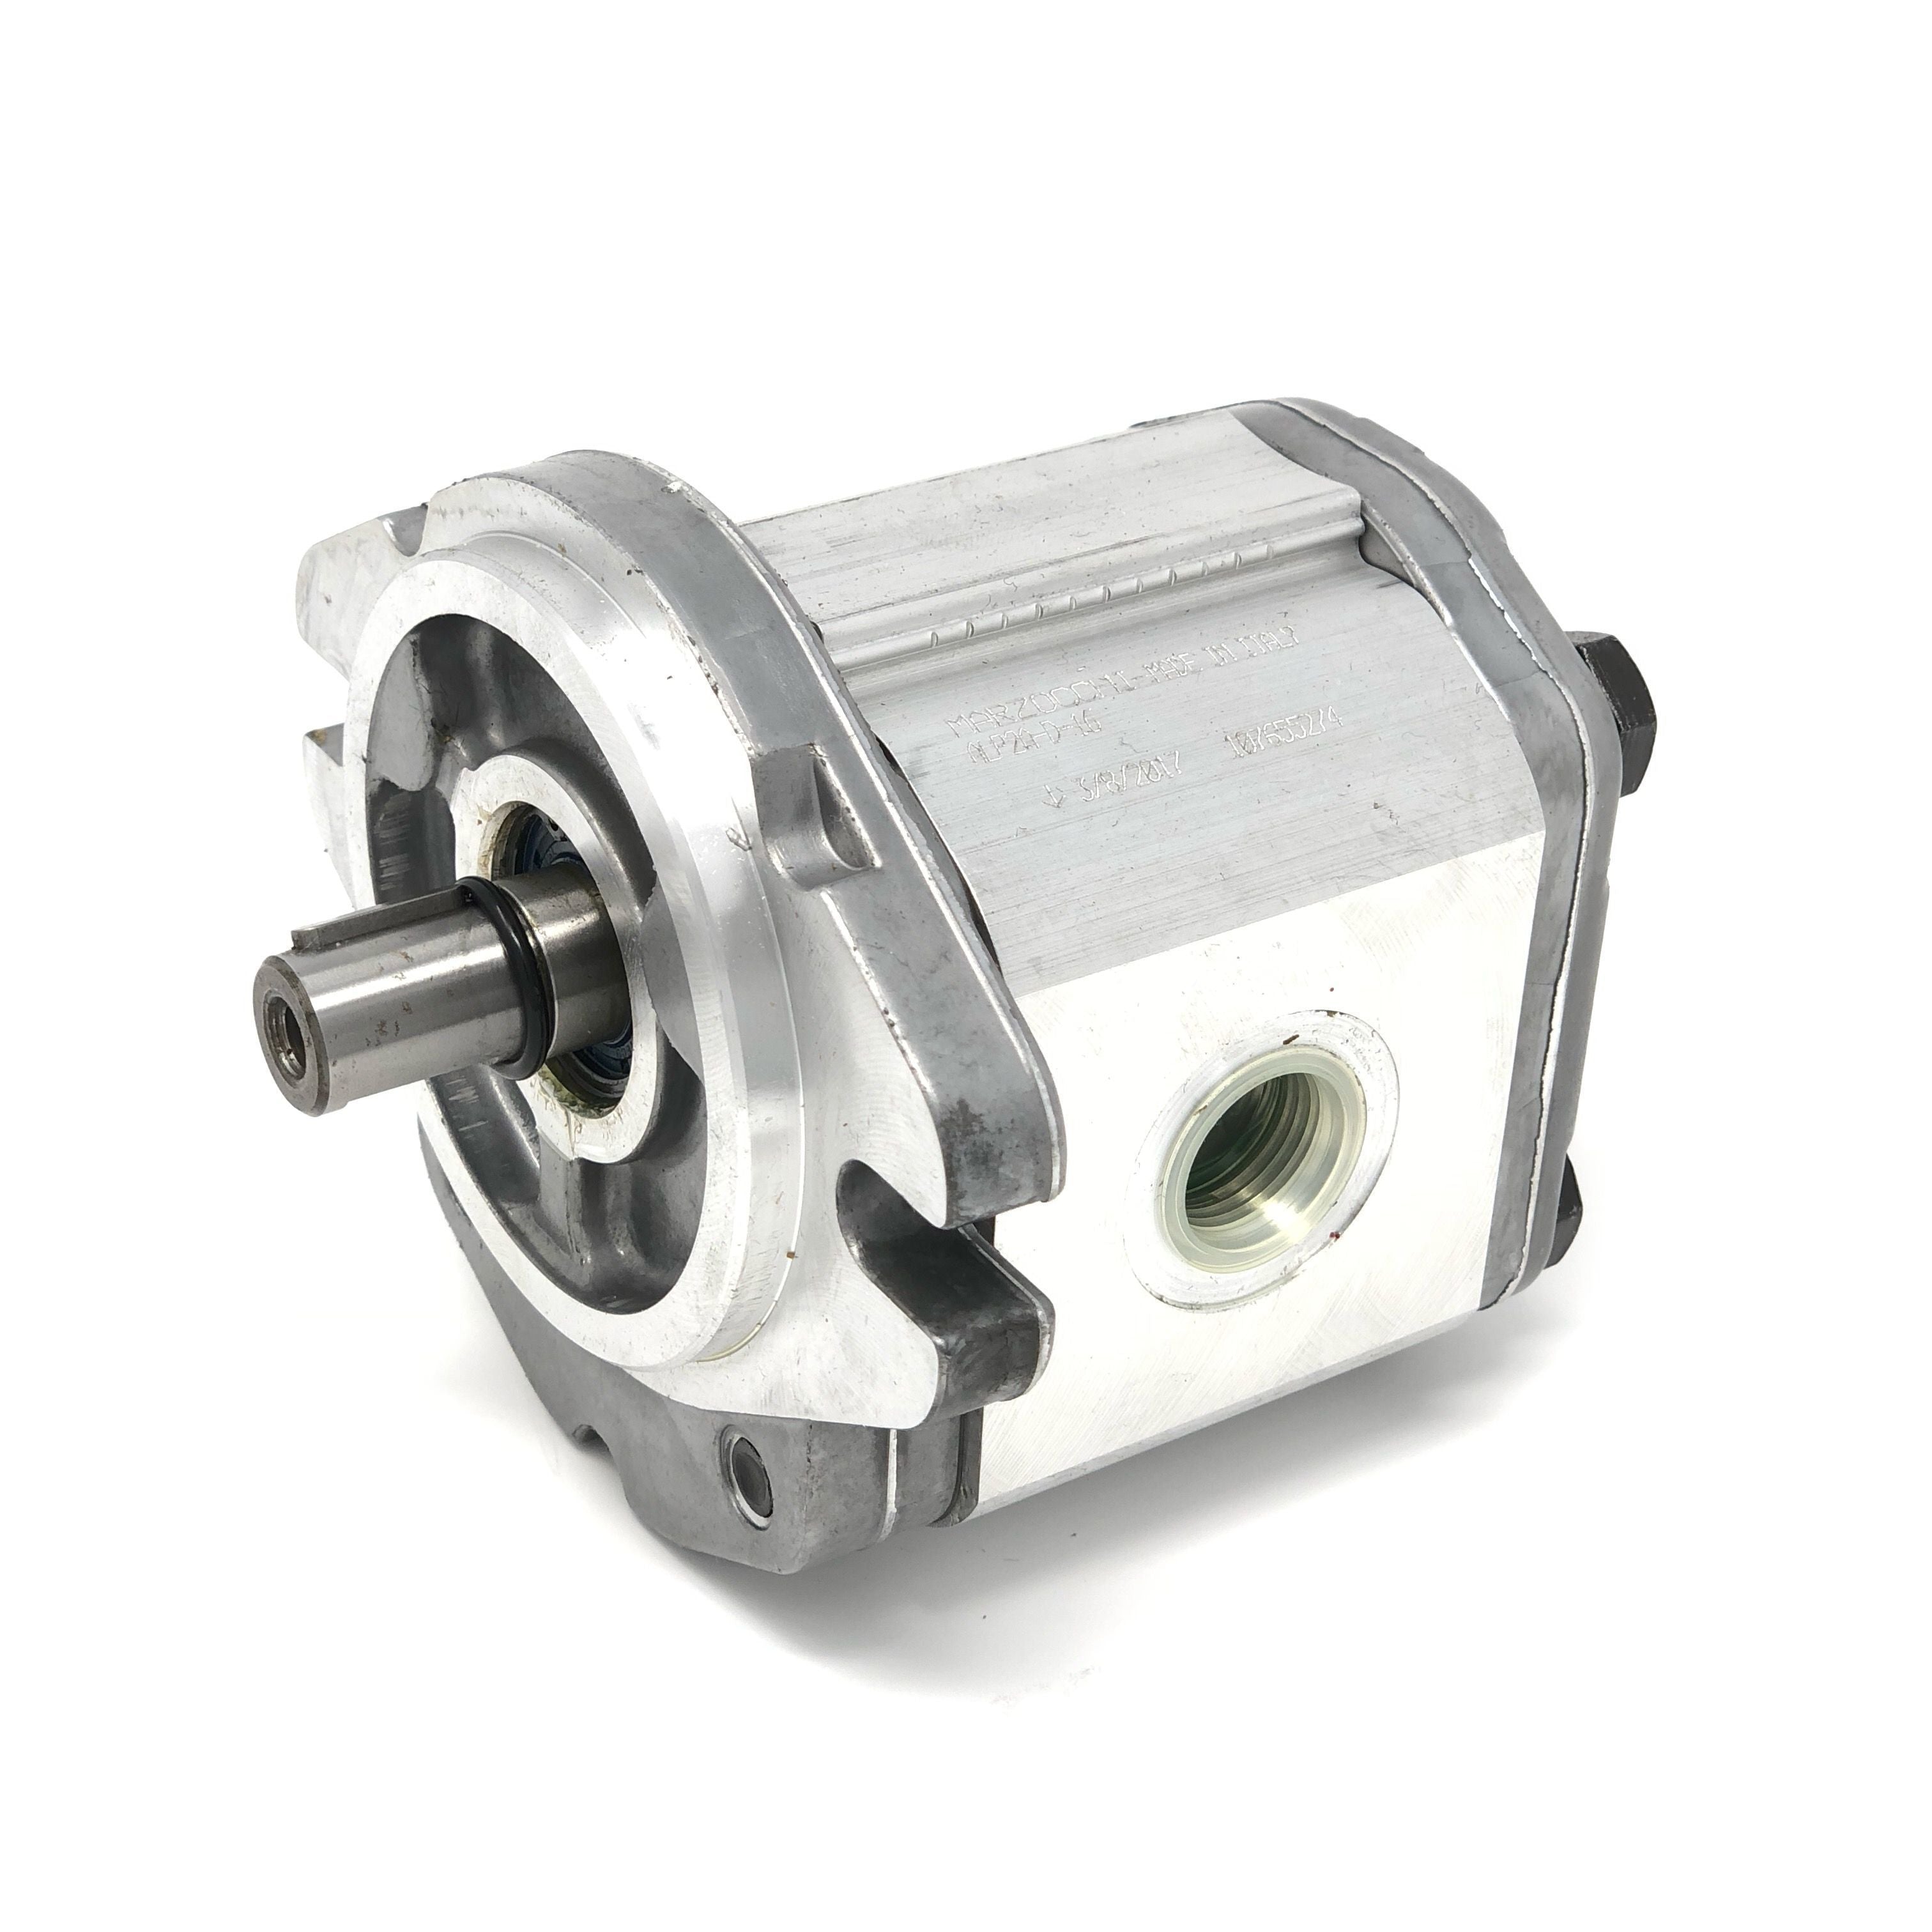 ALP1A-D-7 : Marzocchi Gear Pump, CW, 5.2cc (0.3172in3), 2.47 GPM, 3335psi, 3500 RPM, #8 SAE (1/2") In, #6 SAE (3/8") Out, Keyed Shaft 1/2" Bore x 1/8" Key, SAE AA 2-Bolt Mount